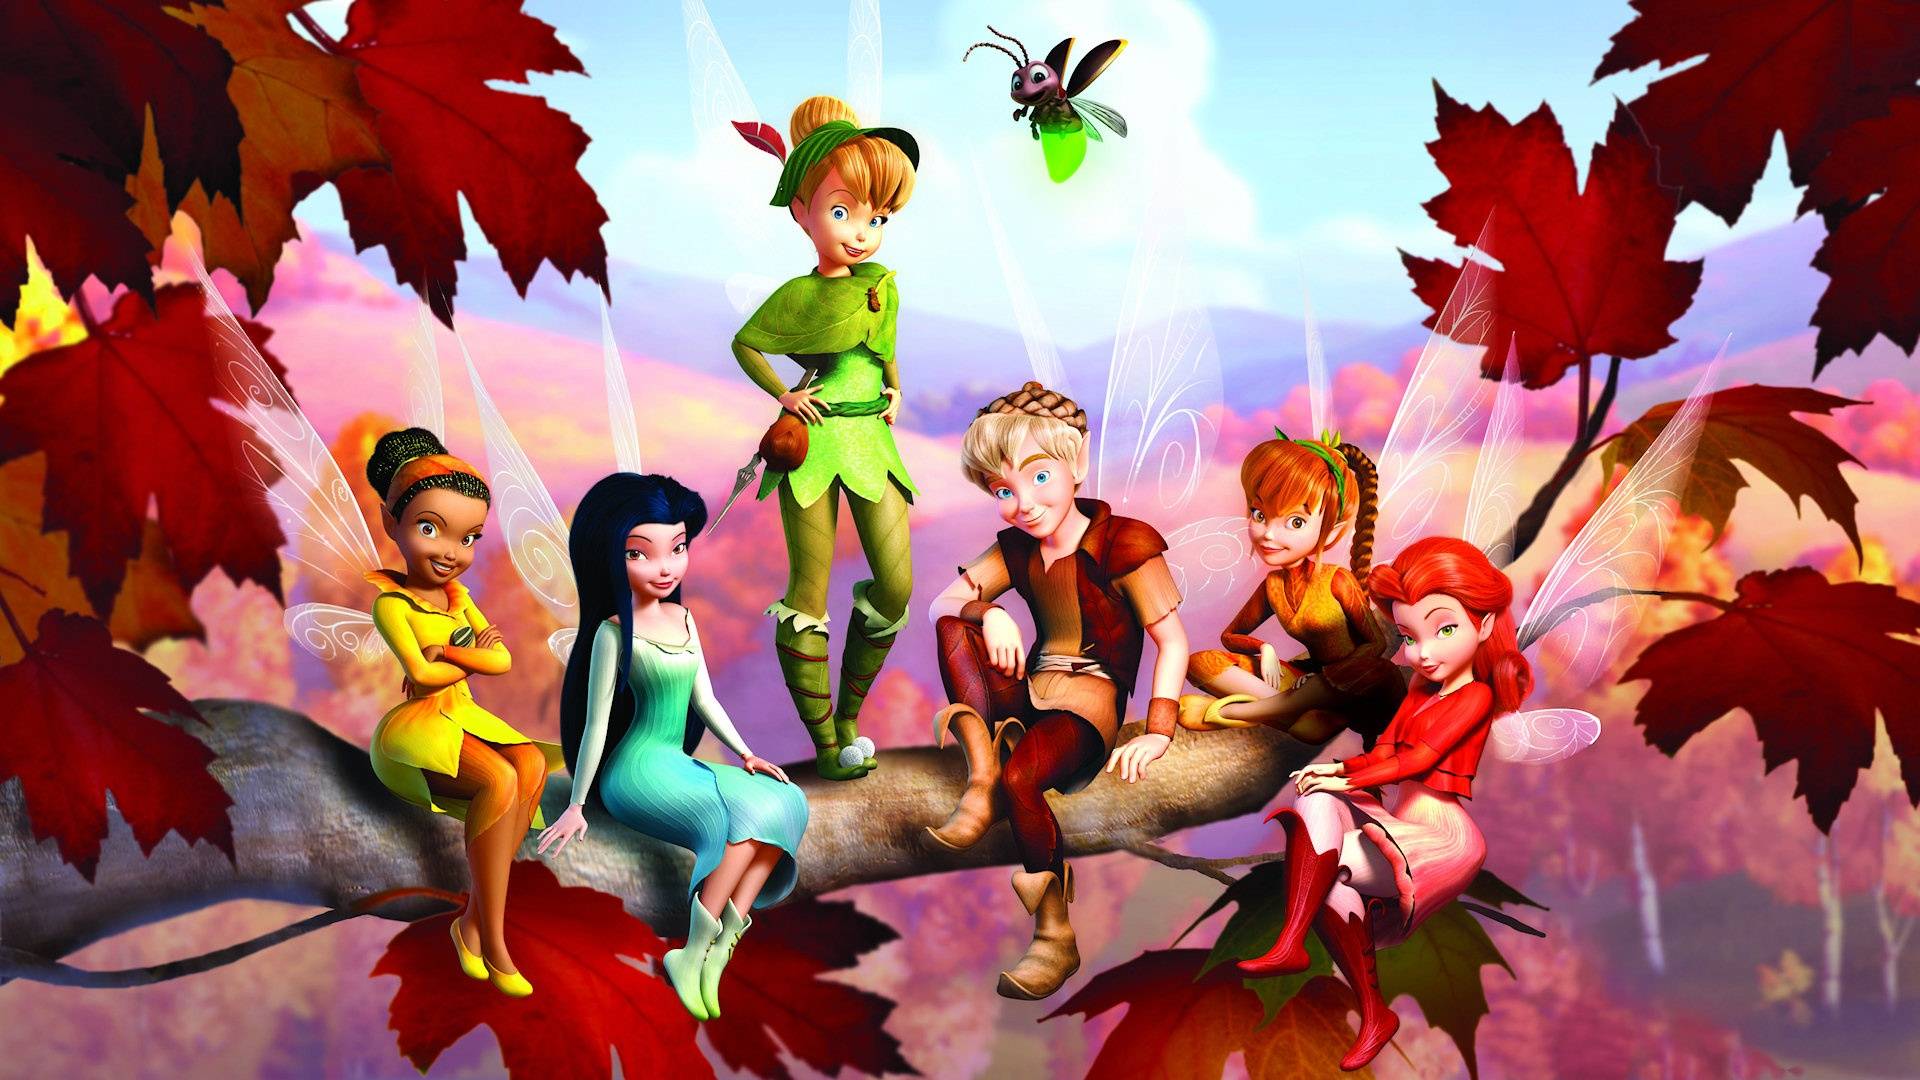 Friends That S My Favourite Wallpaper Of Tinker Bell And Her